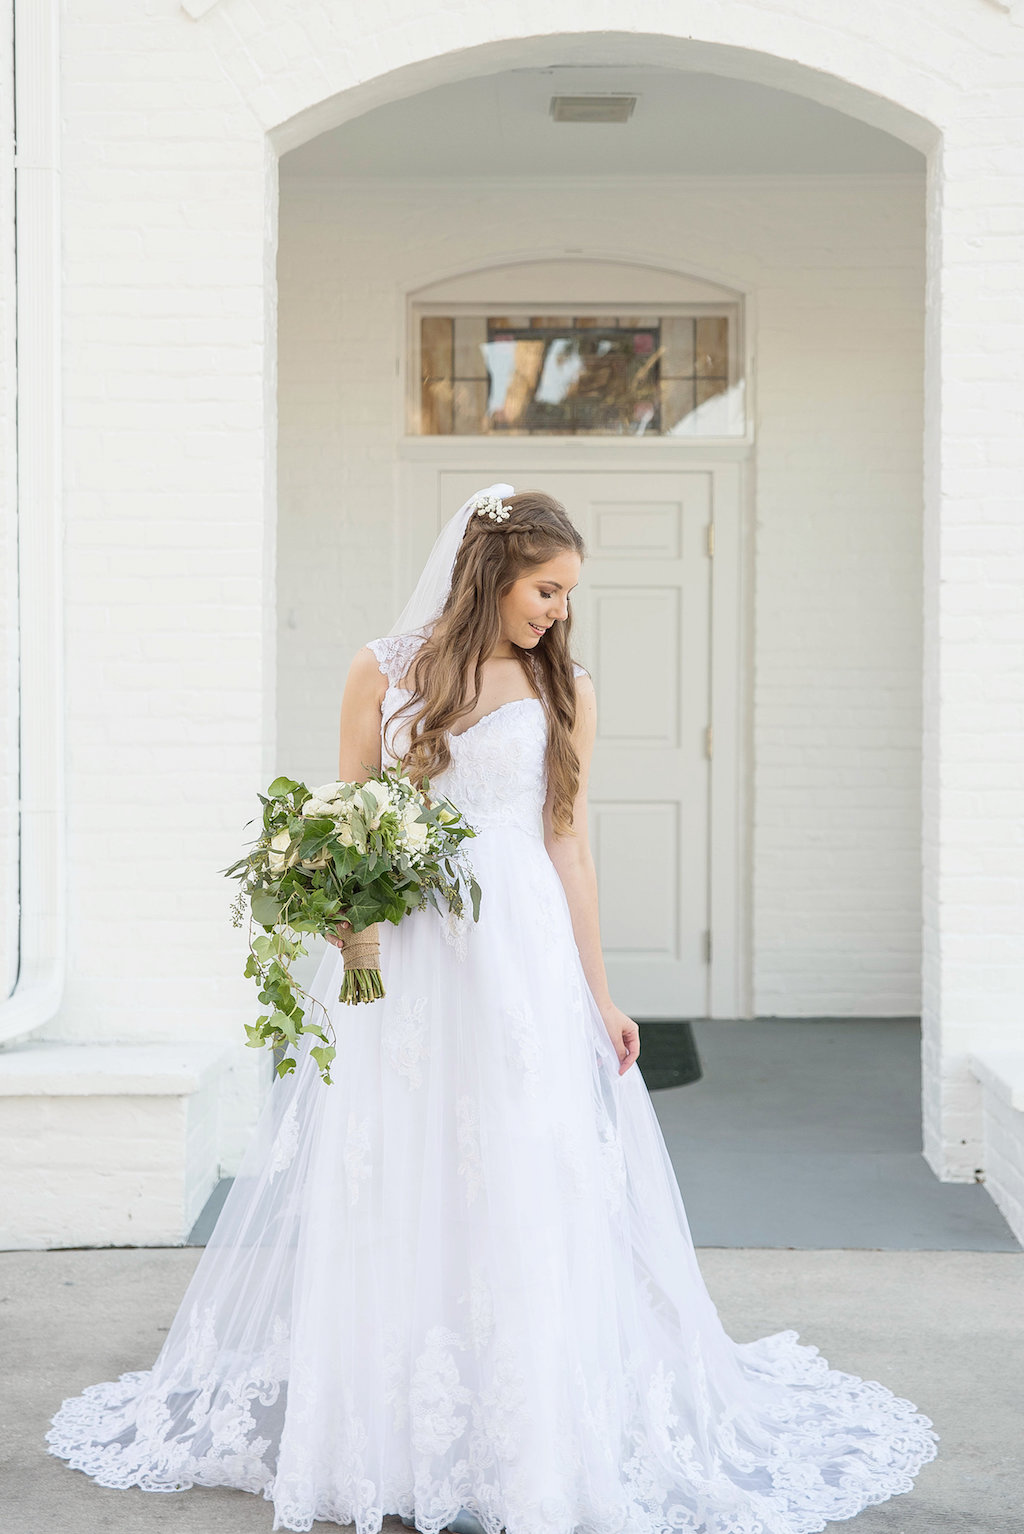 Outdoor Wedding Portrait, Bride in A-Line Lace and Cap Sleeve Wedding Dress and Veil, Greenery and White Floral Bouquet | Tampa Bay Photographer Kristen Marie Photography | Outdoor Bride and Groom Wedding Portrait, Bride in A-Line Lace and Cap Sleeve Wedding Dress and Veil | Tampa Bay Photographer Kristen Marie Photography | Venue Palm Harbor White Chapel and Harbor Hall